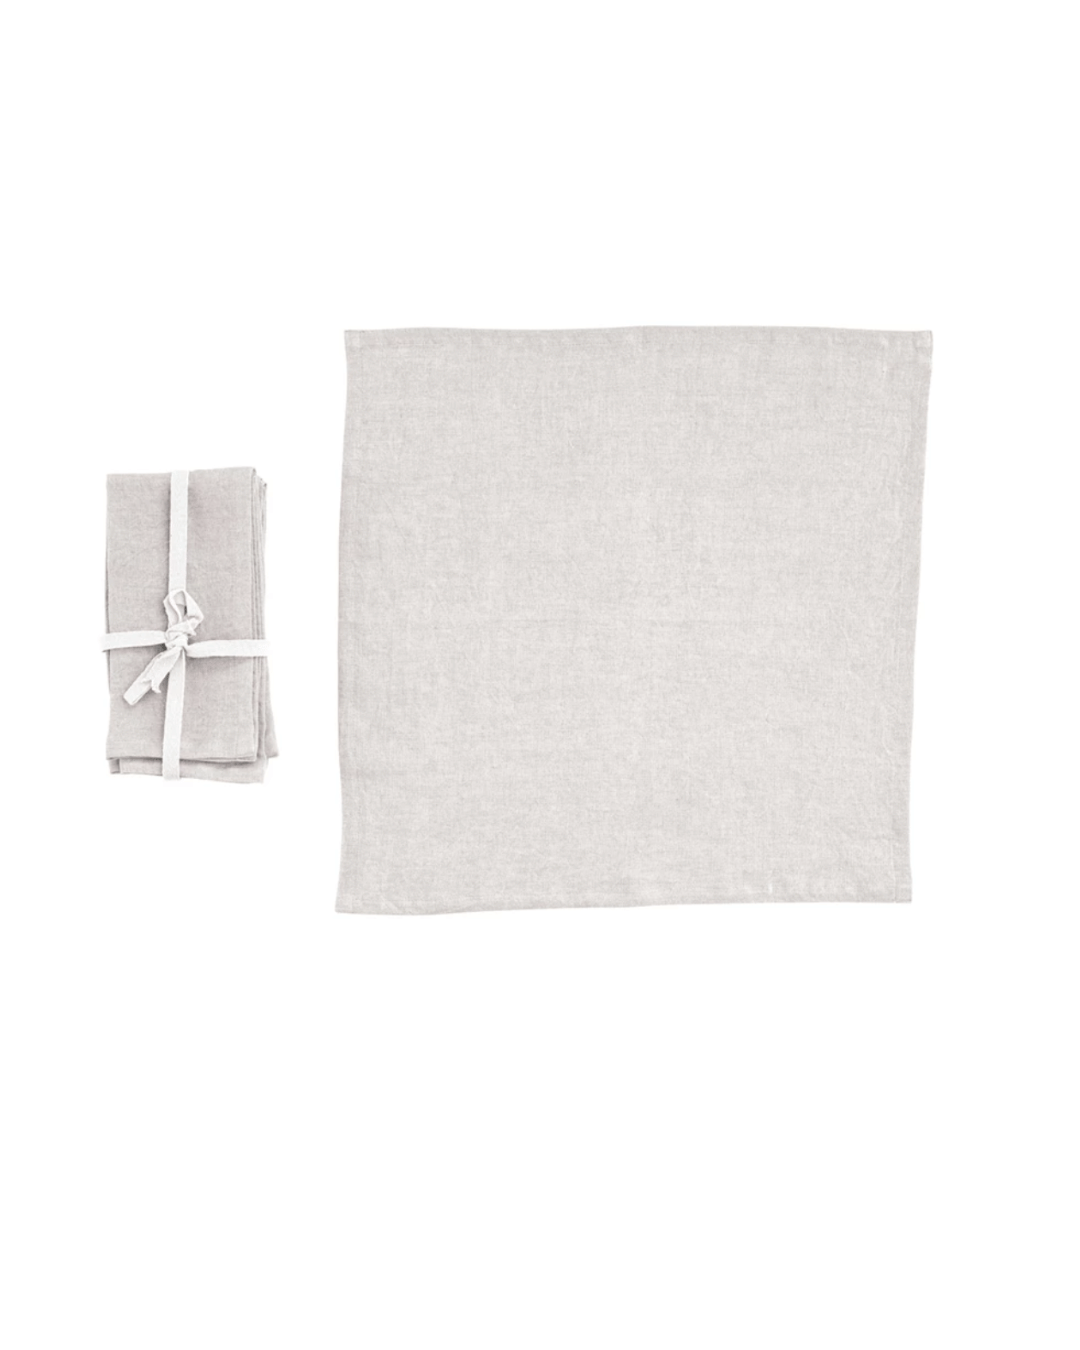 A neatly folded gray Linen Napkins Ecru S/4 tied with a white ribbon beside an unfolded matching napkin on a plain white background, evoking the simplistic elegance of a Scottsdale Arizona bungalow. - Creative Co-op